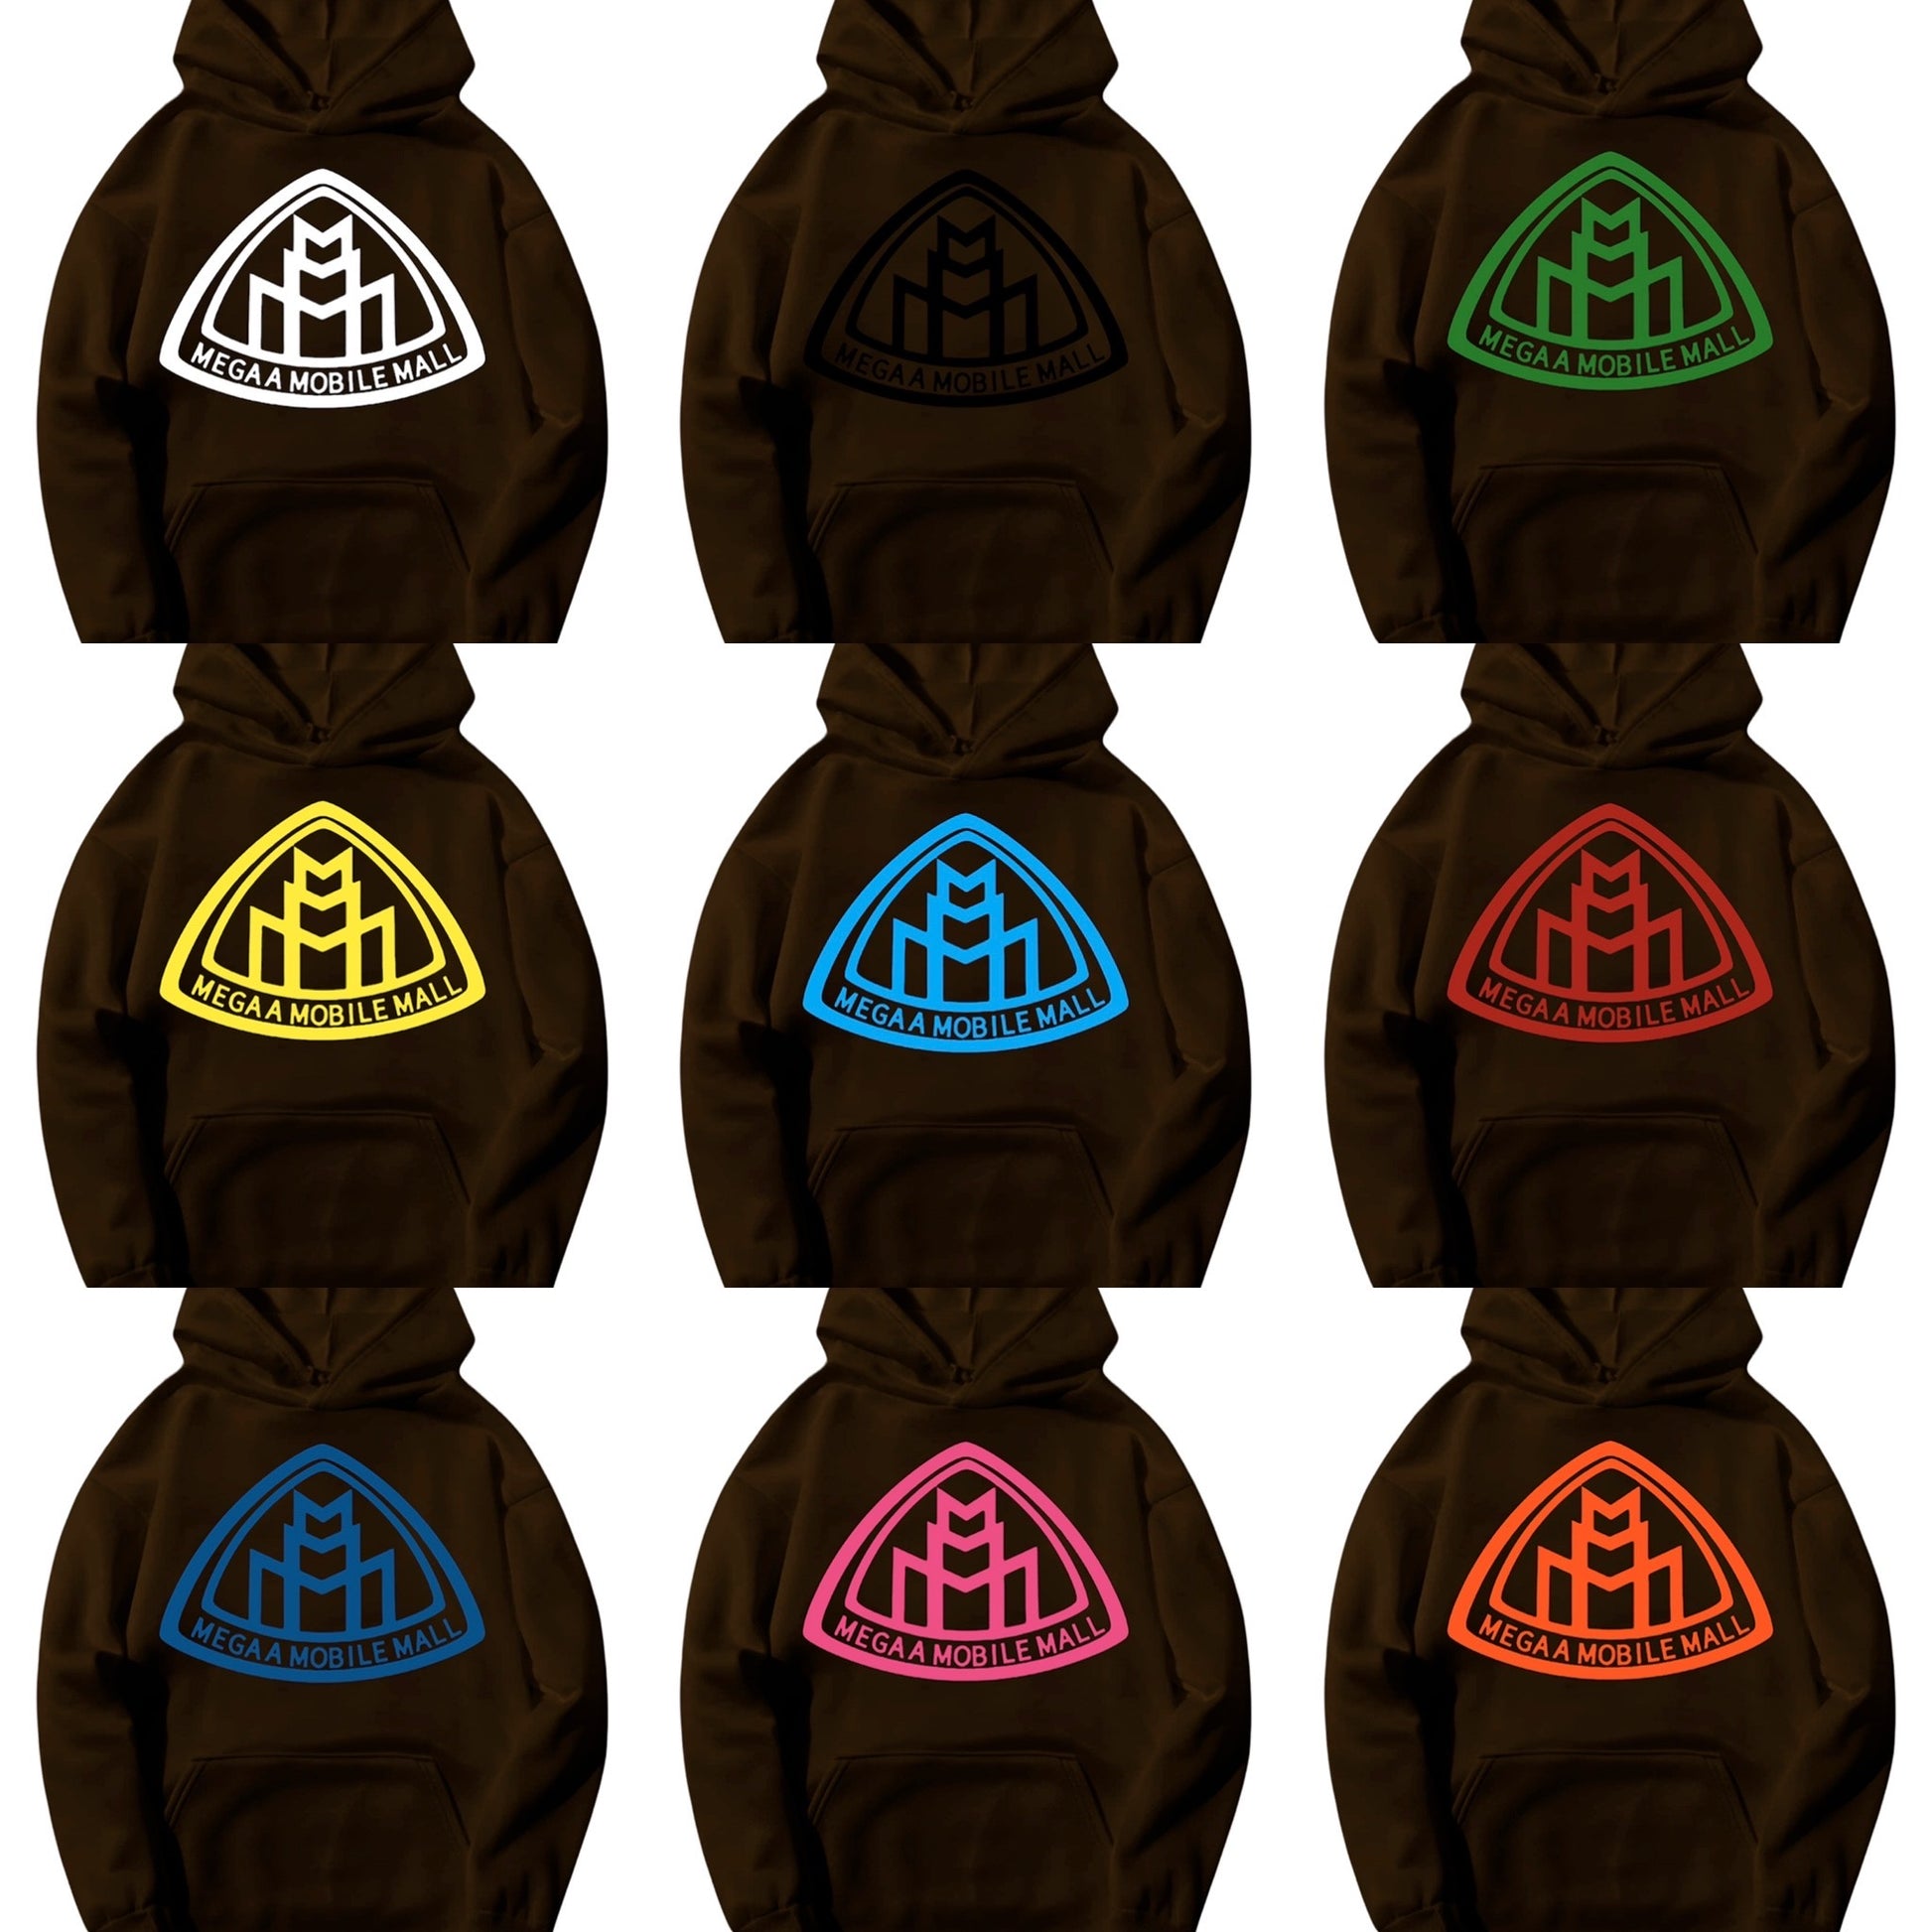 brown megaamobilemall logo Heavy Blend Fleece Hoodie with 11 different logo color options